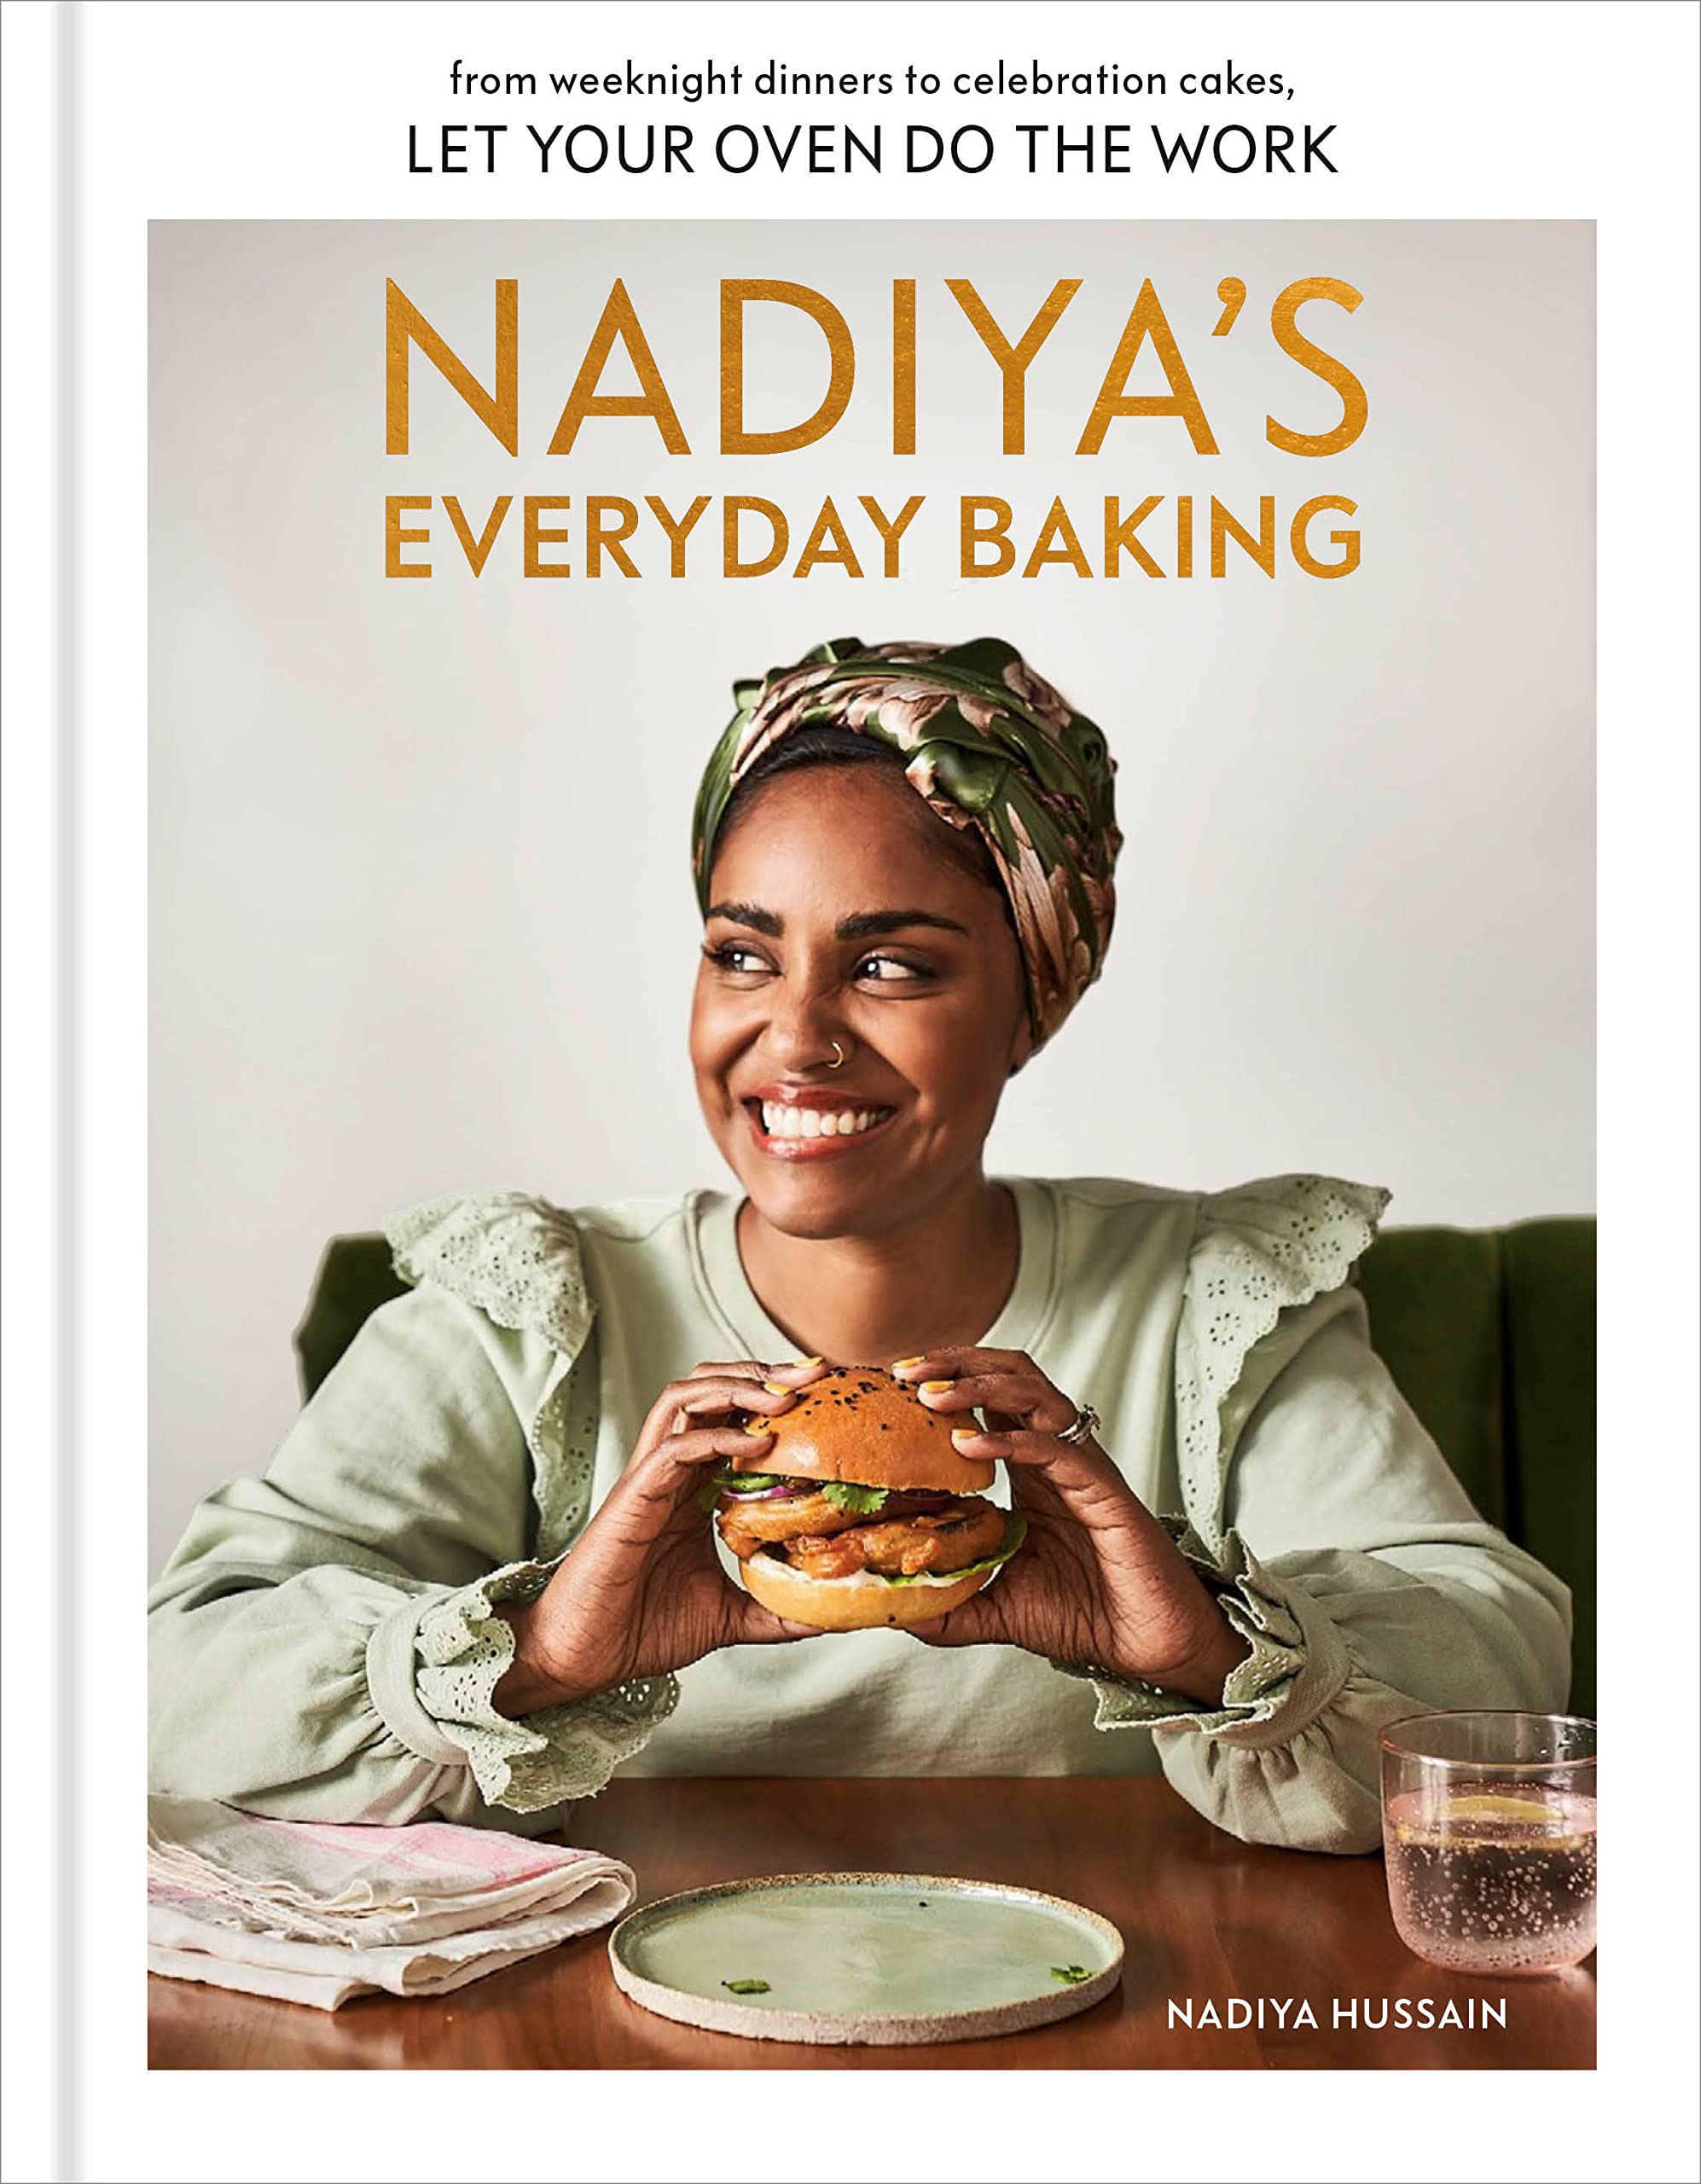 Nadiya's Everyday Baking: From Weeknight Dinners to Celebration Cakes, Let Your Oven Do the Work (Nadiya Hussain)